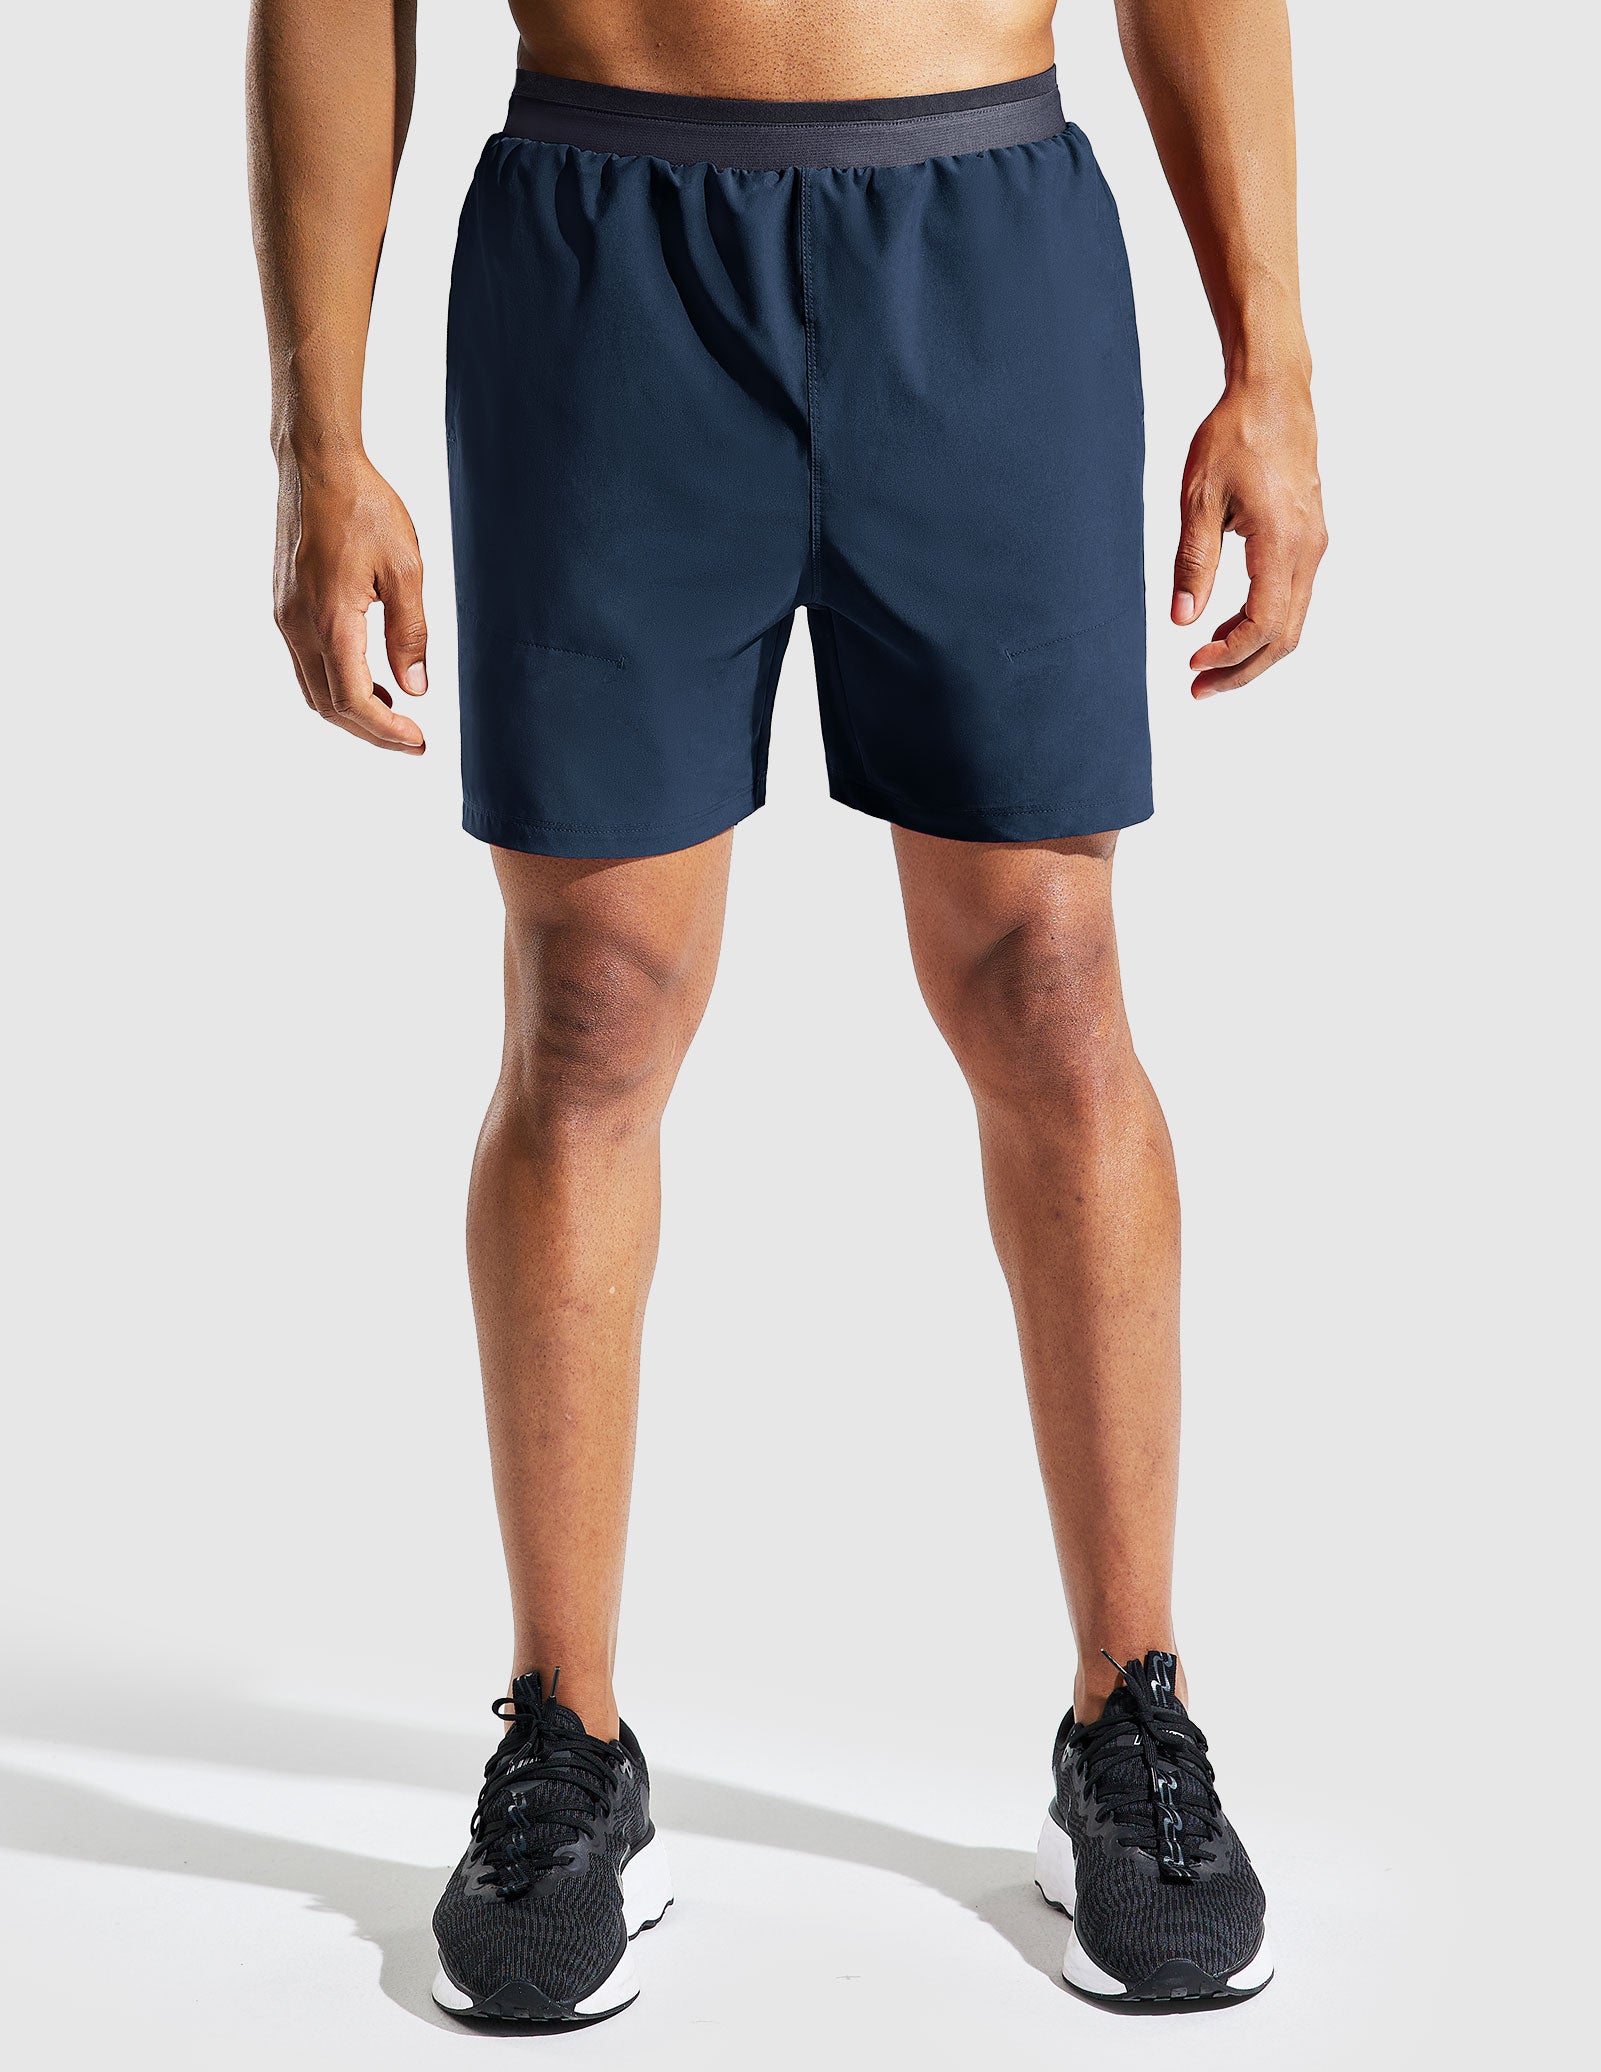 Men's 2 in 1 Running Shorts with Liner 5" Quick Dry Athletic Shorts